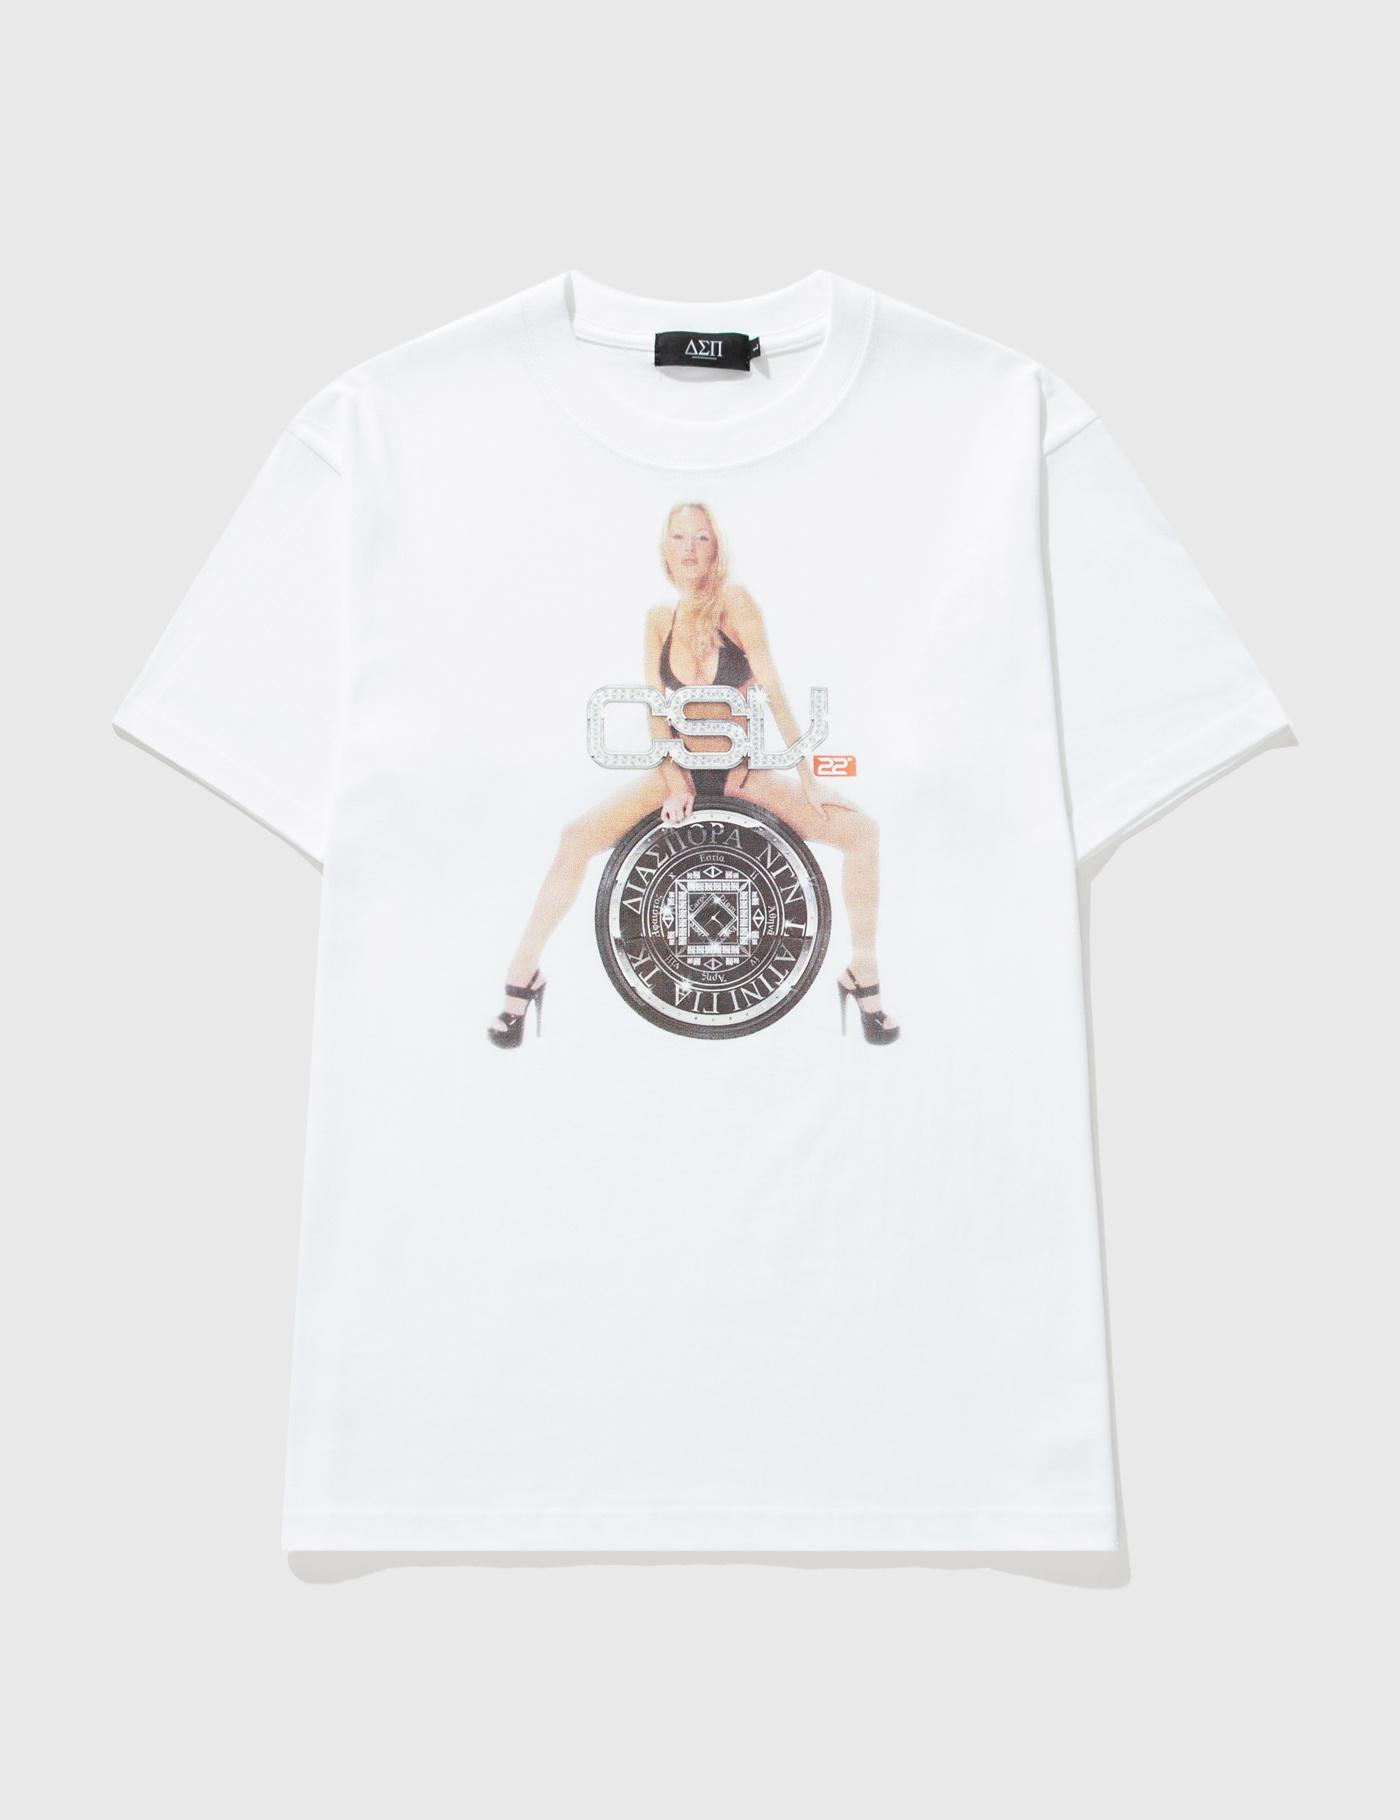 Pinup T-shirt by CAR SERVICE